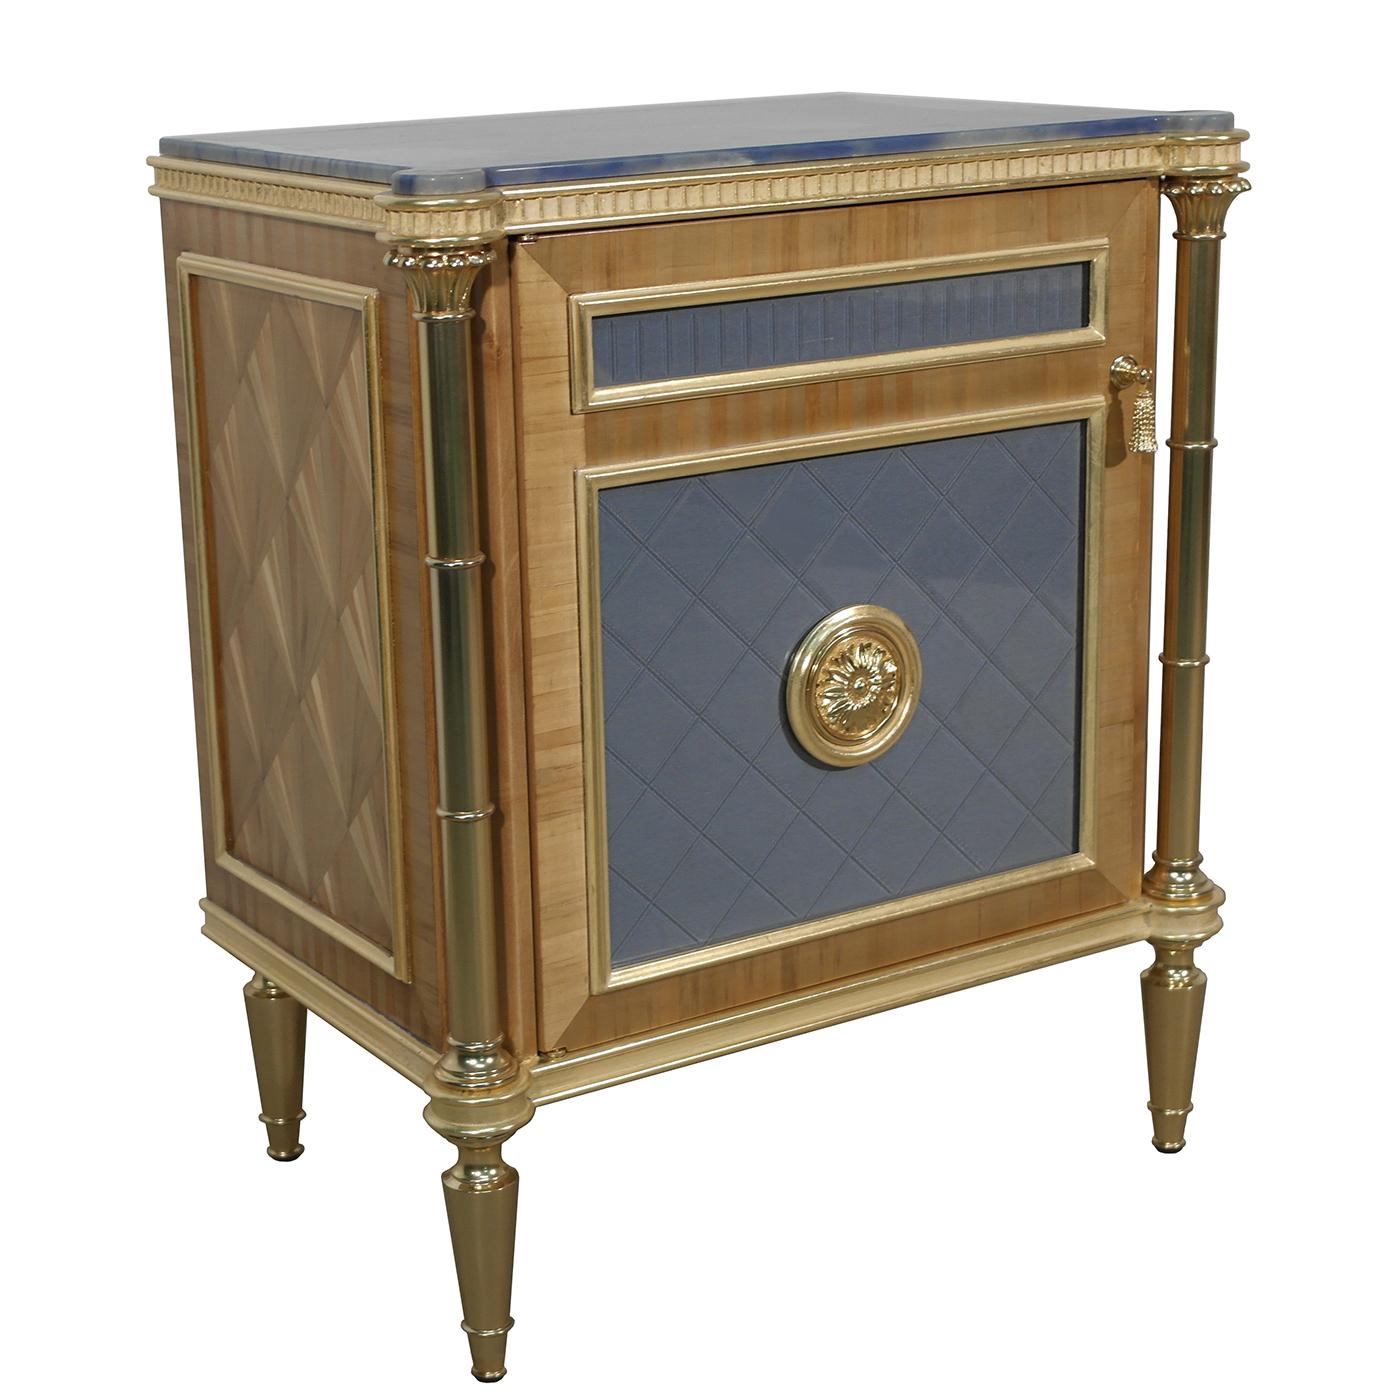 This one-door wooden bedside table boasts a glossy finish and natural straw veneer accents. Complete with one inside drawer, the design is enhanced with brass details, flaunting a 22-karat gold-plated finish. The 22-karat gold leaf accents feature a